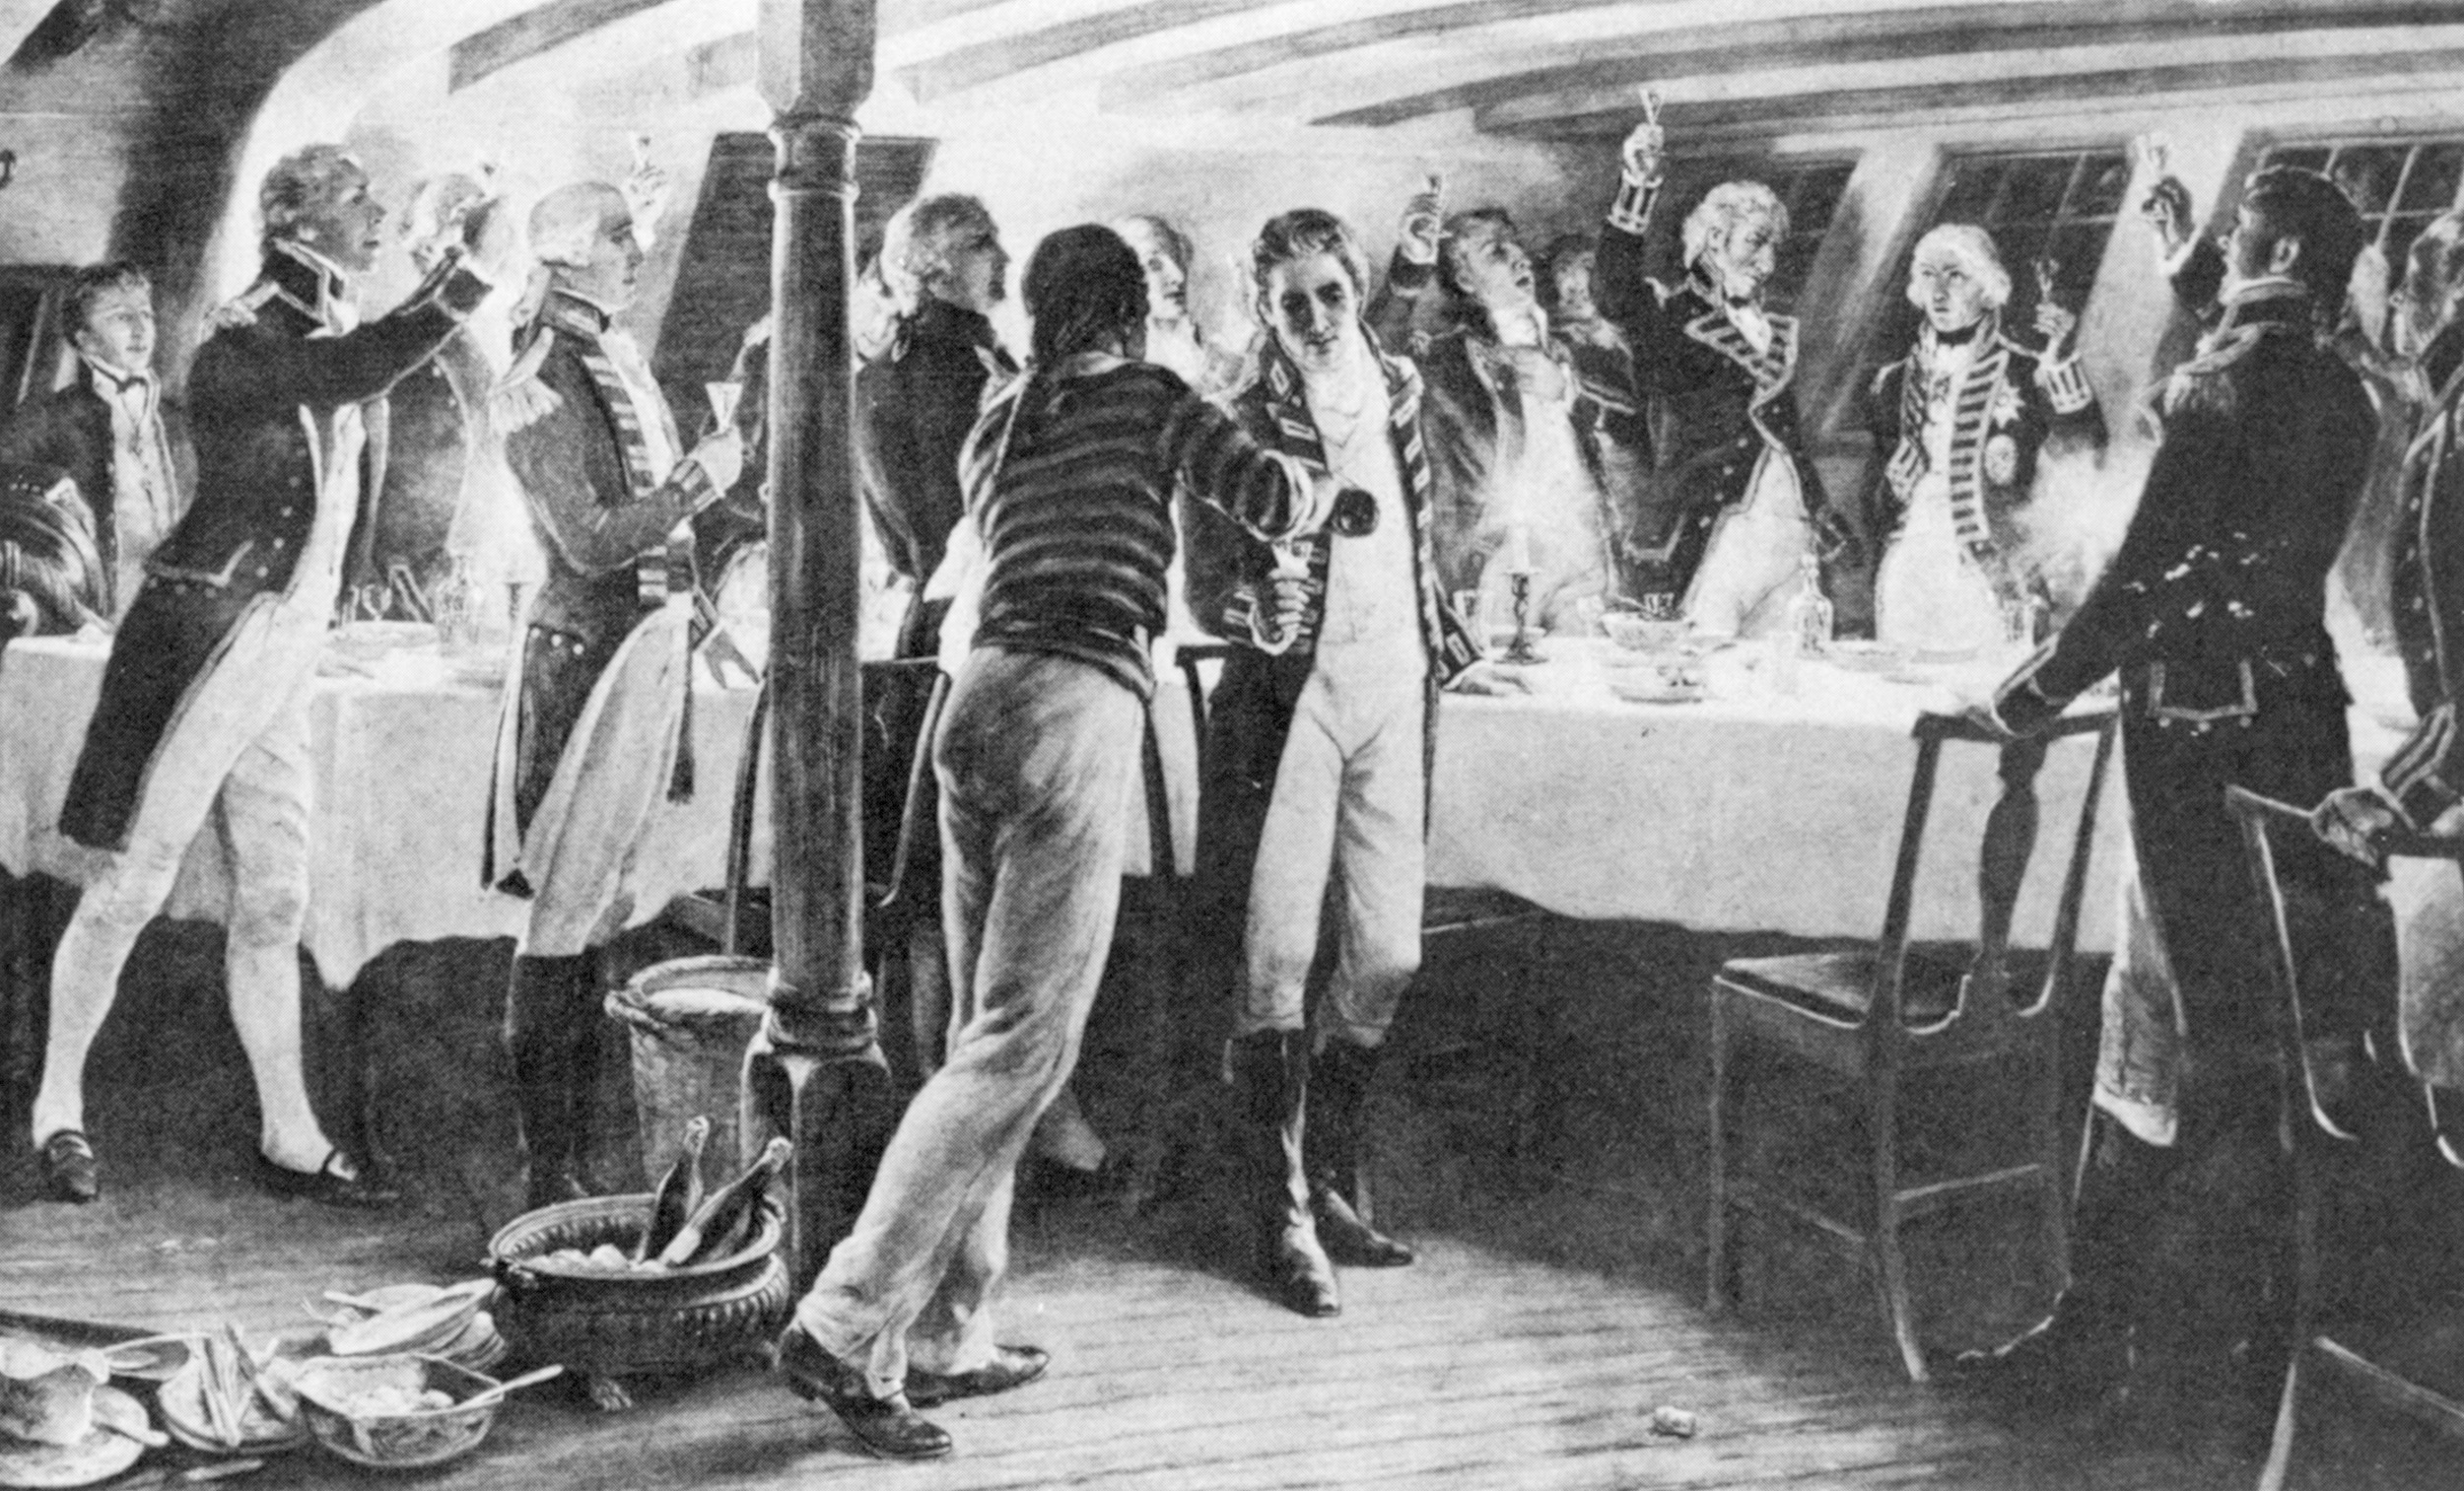 Nelson’s captains, gathering aboard the Elephant on the night before the battle, join their one-armed admiral in a toast to victory the next day.